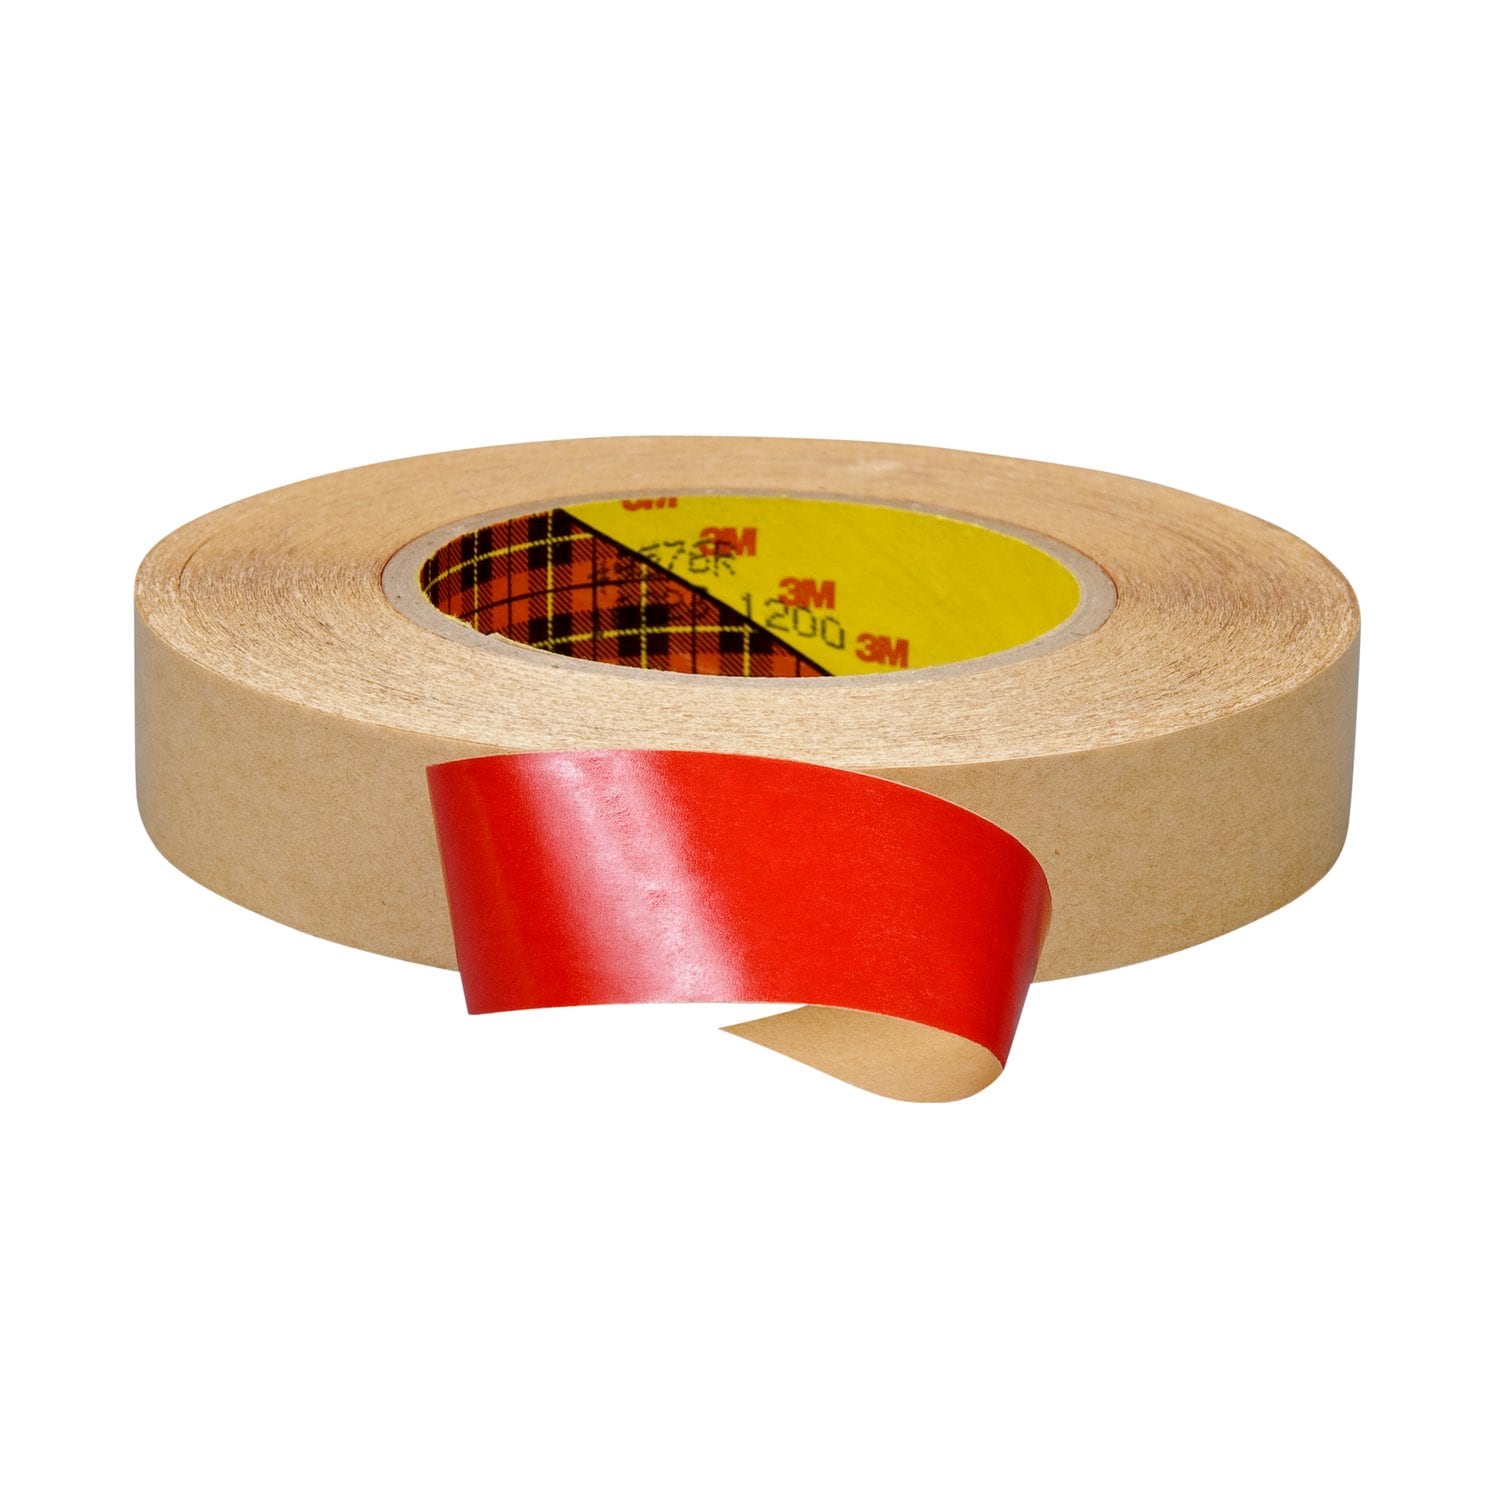 7000123826 - 3M Double Coated Tape 9576R, Red, 2 in x 60 yd, 4 mil, 24 rolls per
case